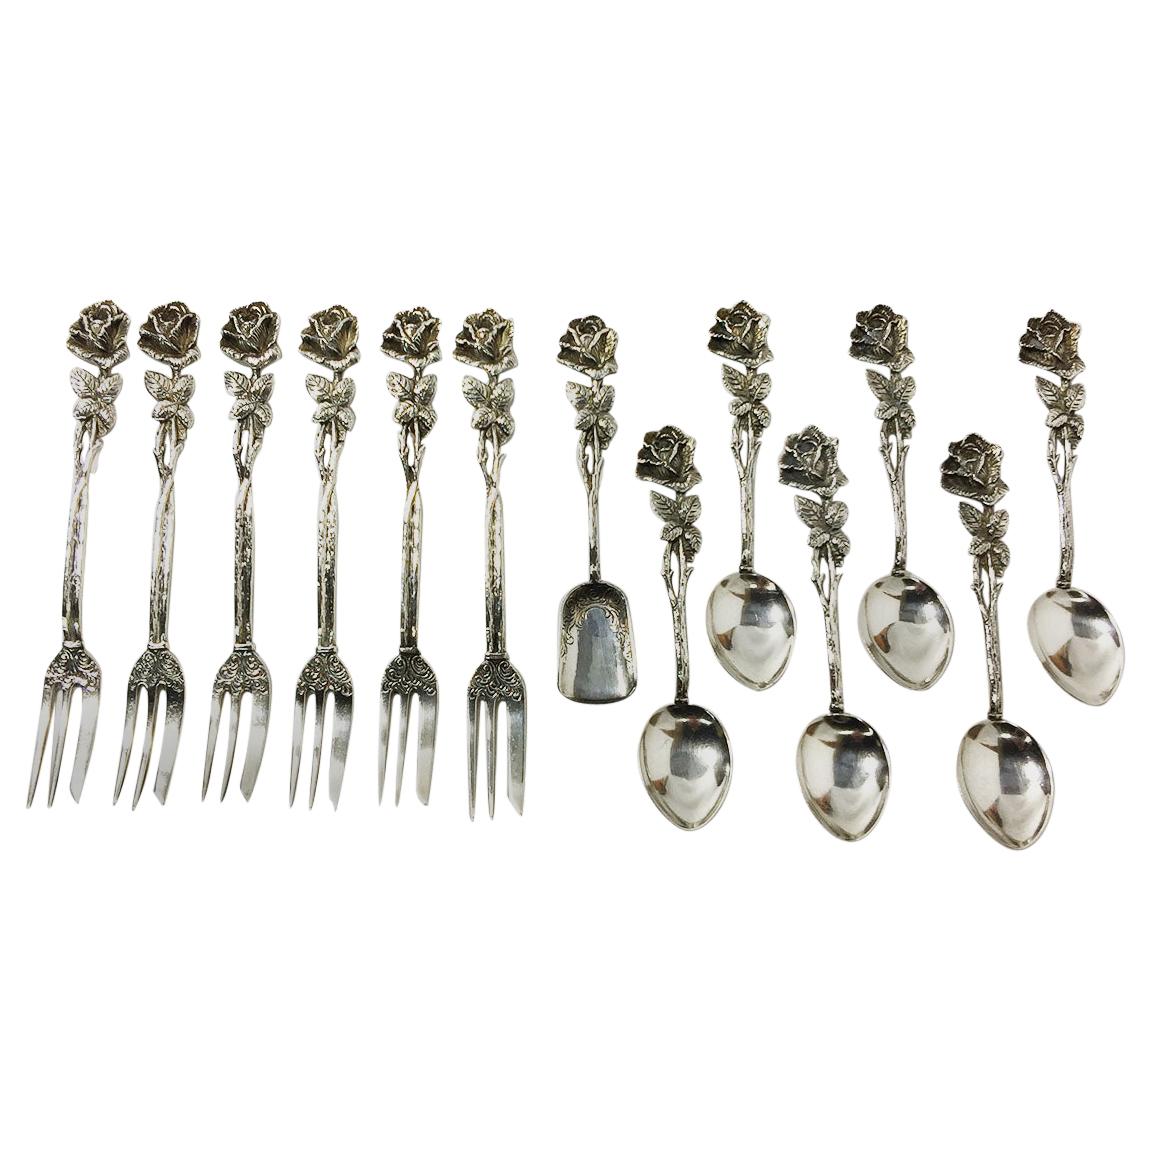 Silver Pastry Forks, Teaspoons and a Sugar Scoop by Christoph Widmann, Germany For Sale